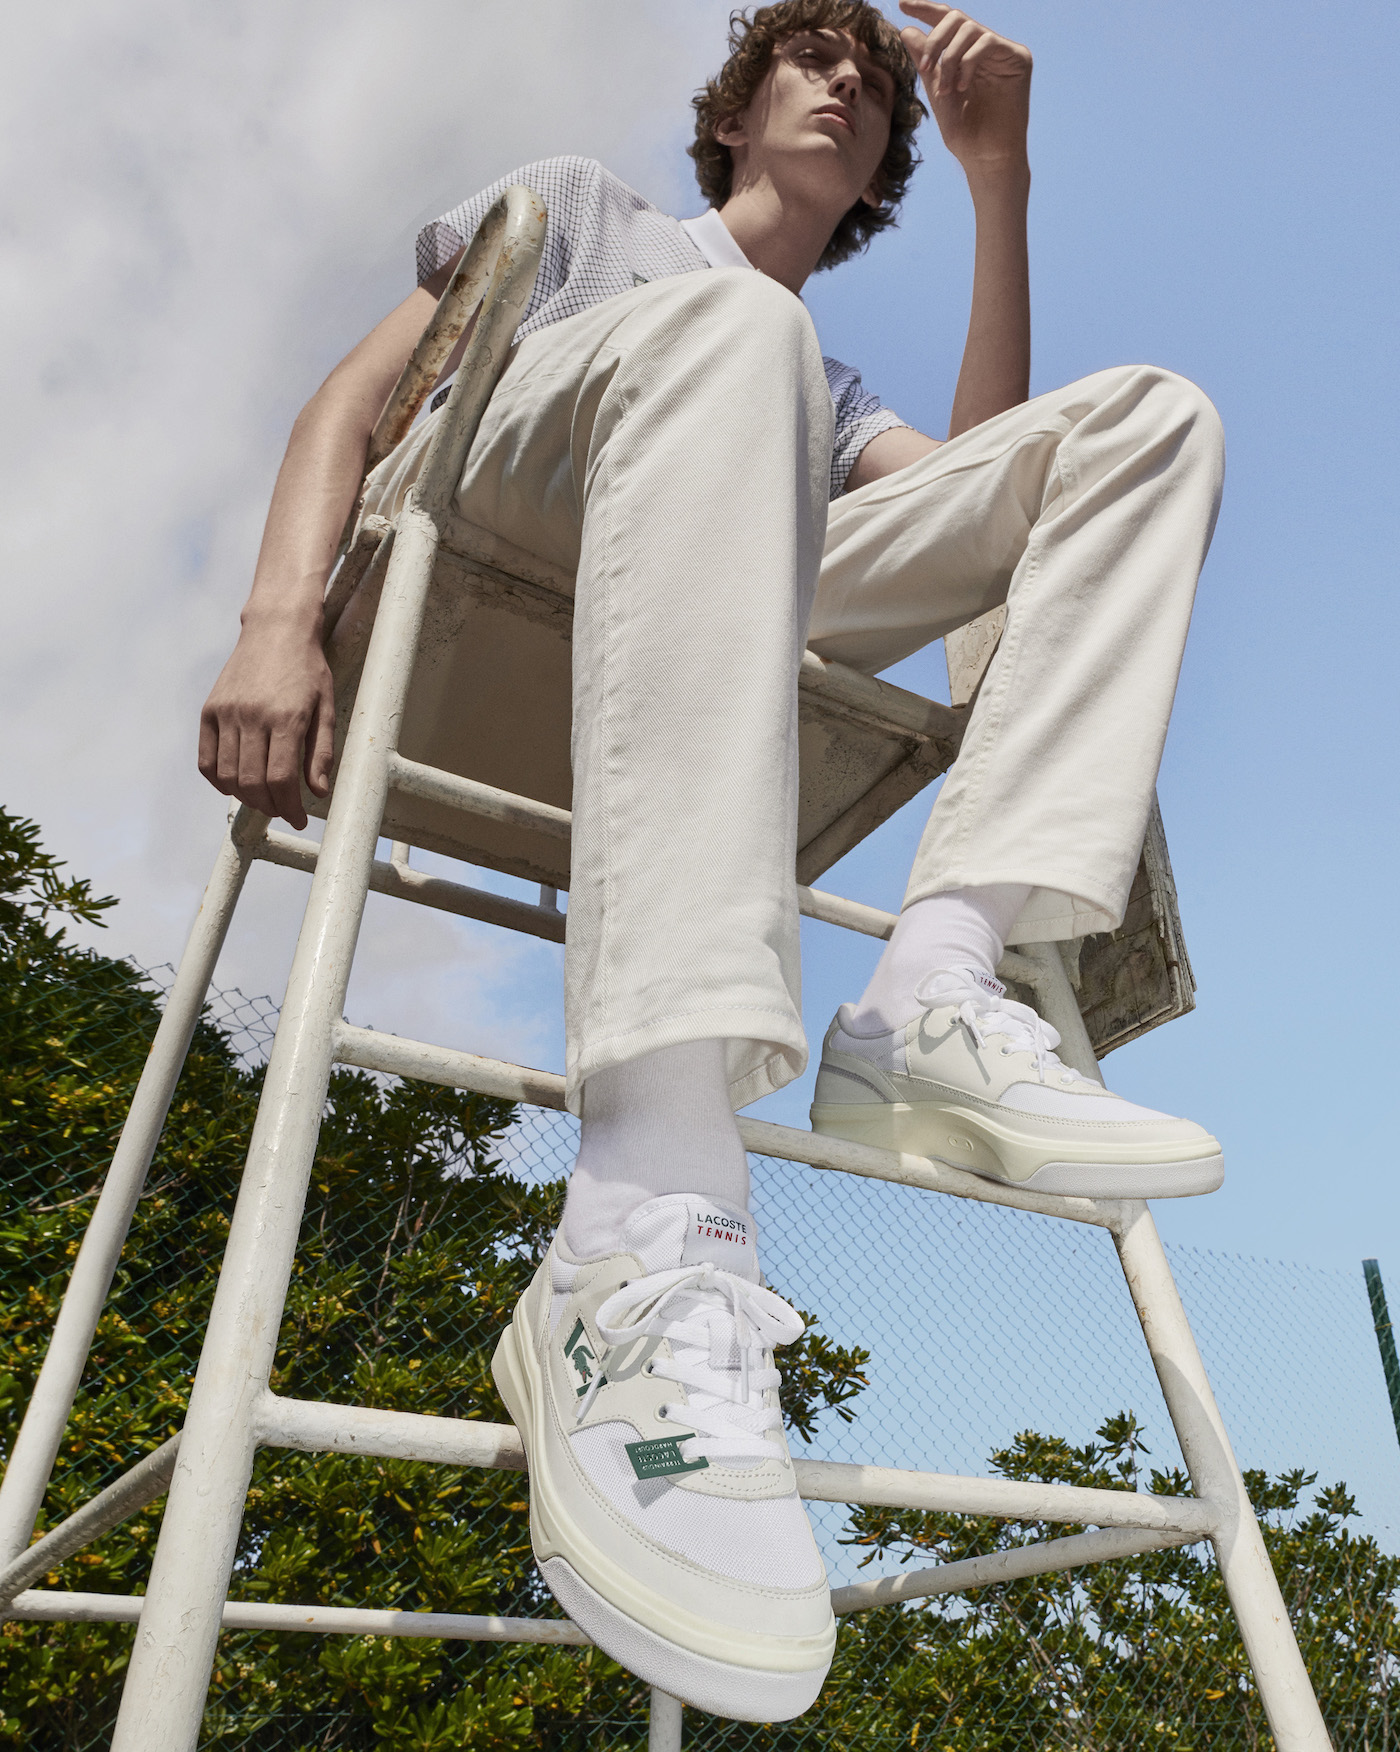 LACOSTE Drops Heritage 2020 Sneakers Collection – PAUSE Online | Men's Fashion, Style, Fashion & Streetwear